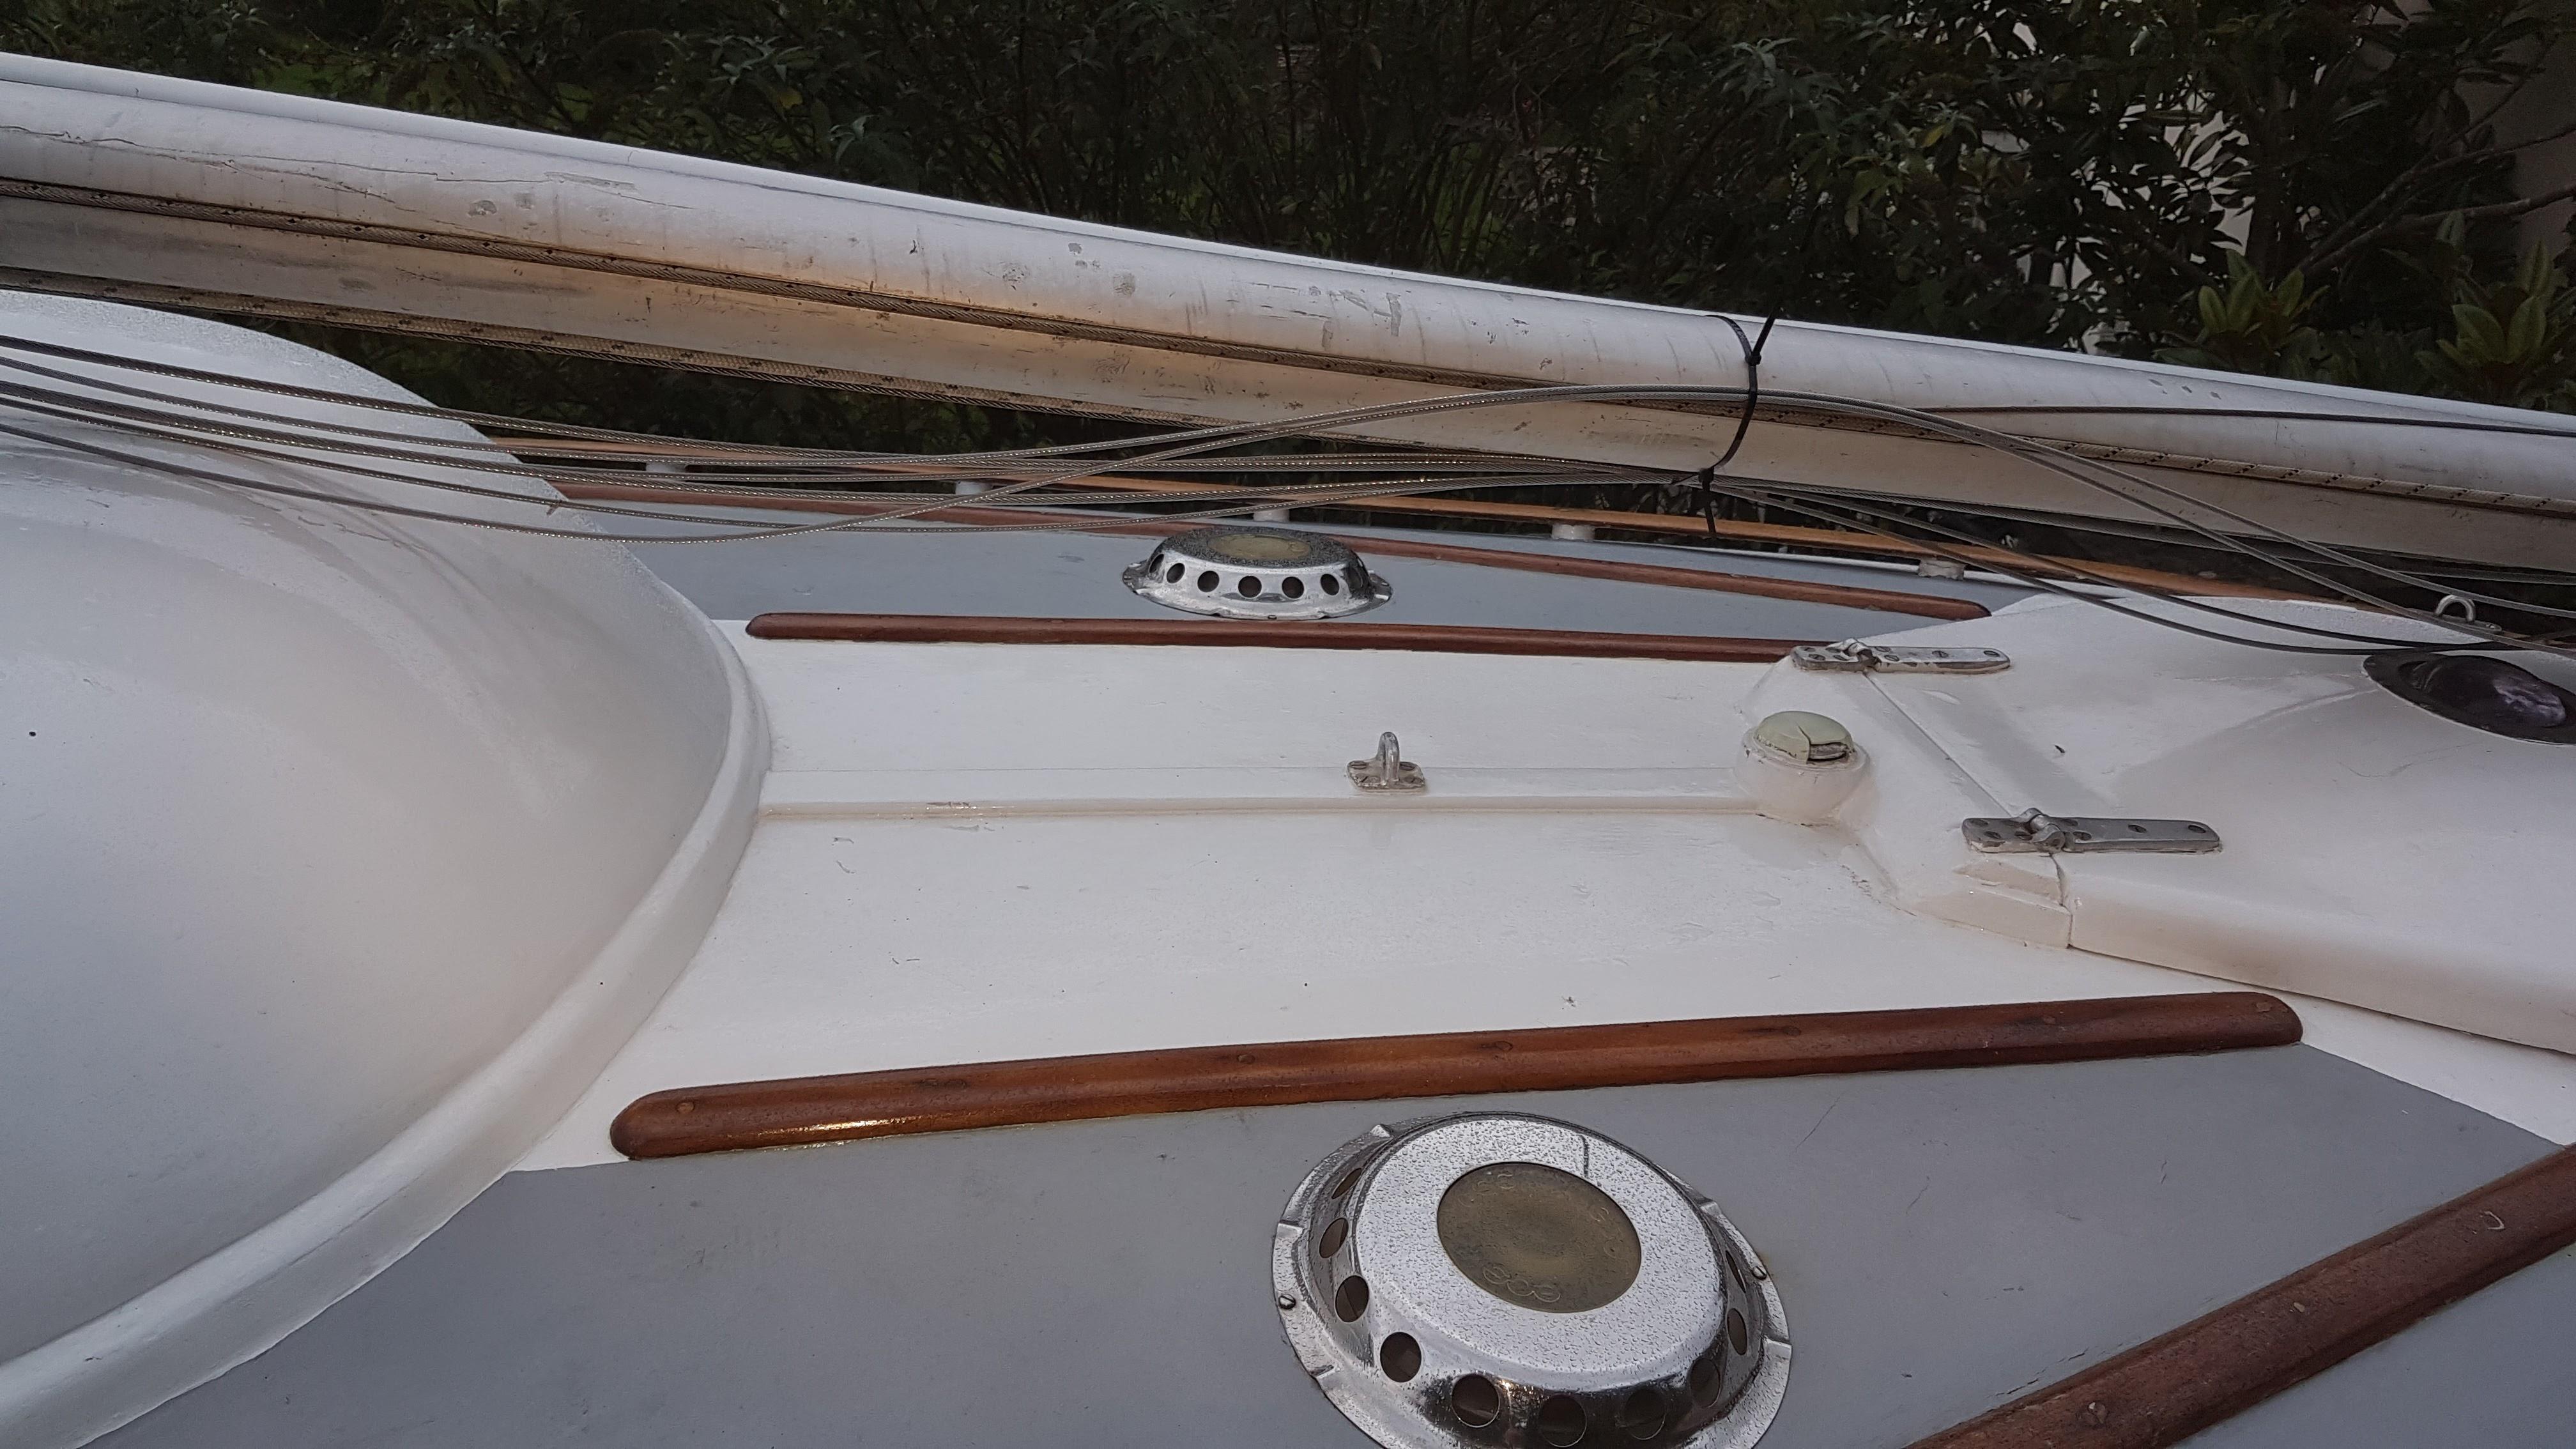 Great foredeck with ventilators